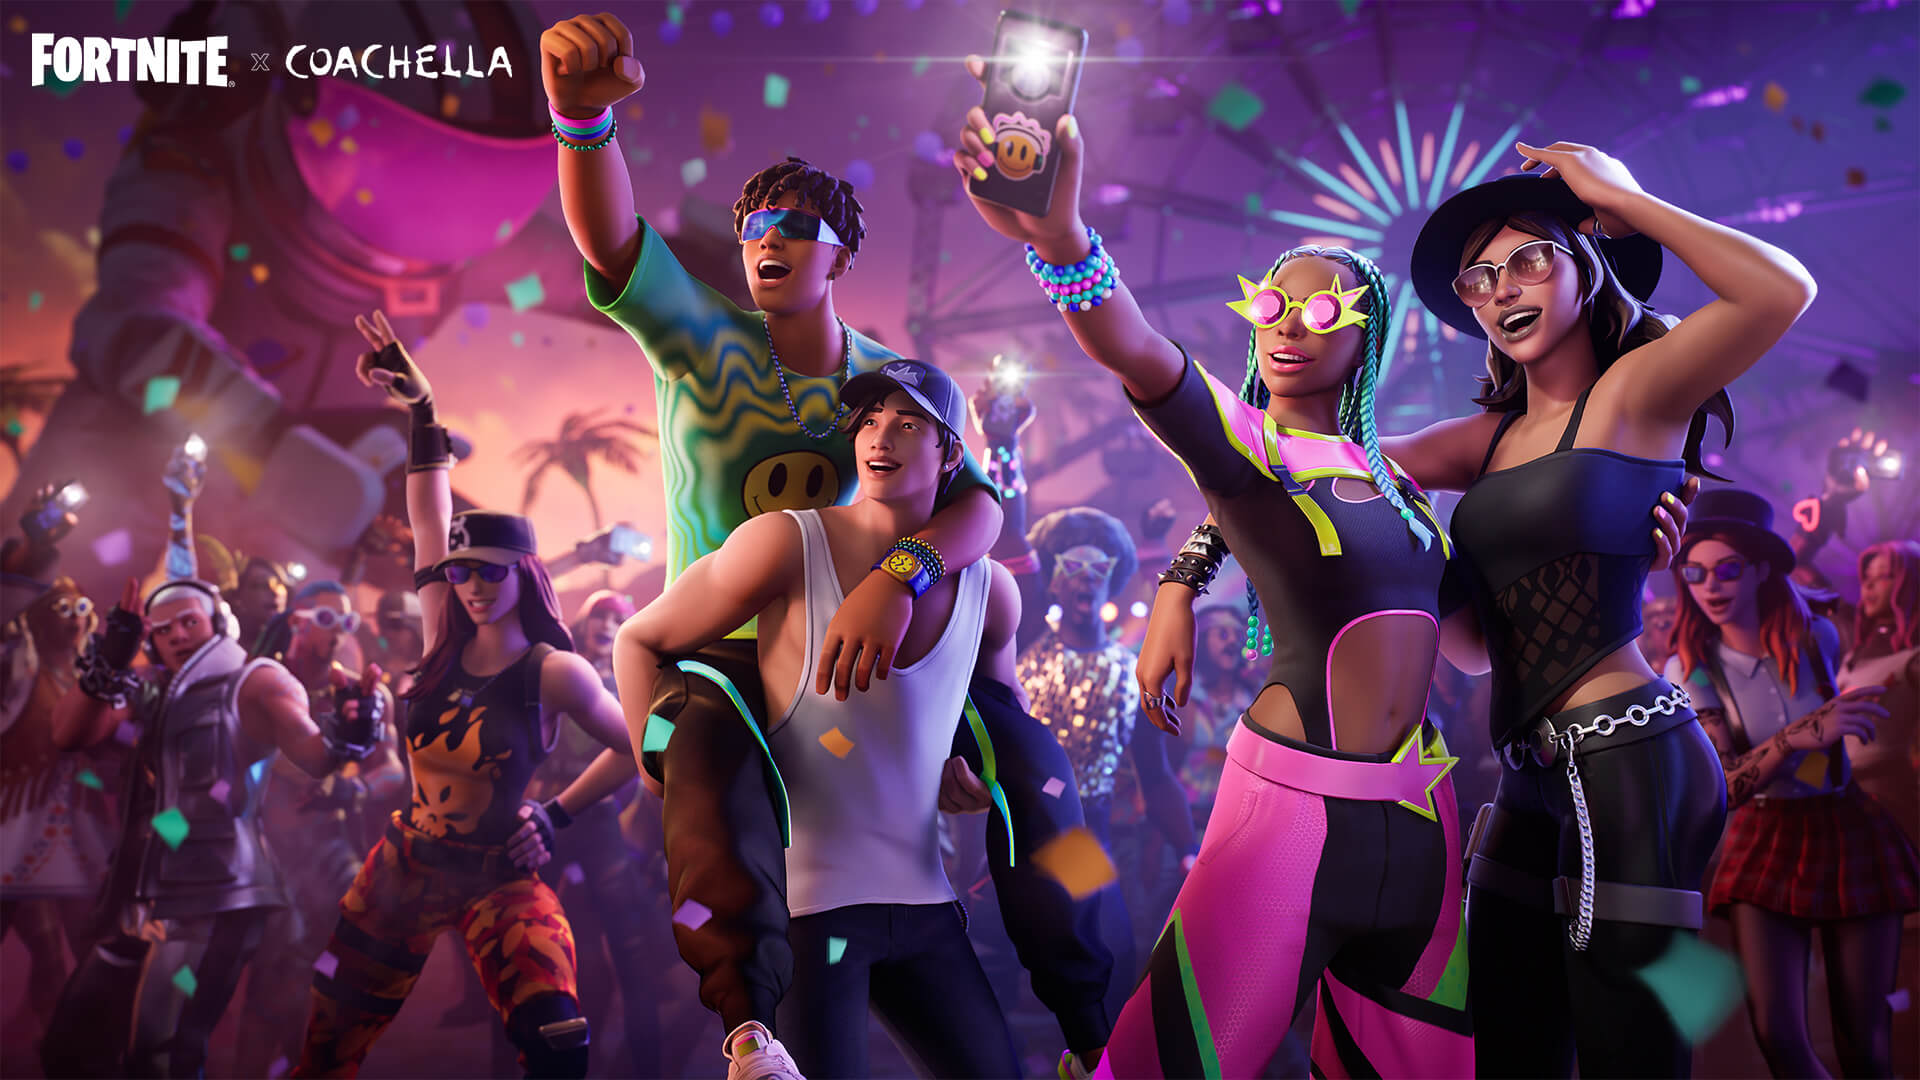 Fortnite Teams Up With Coachella For New In-Game Items & Skins